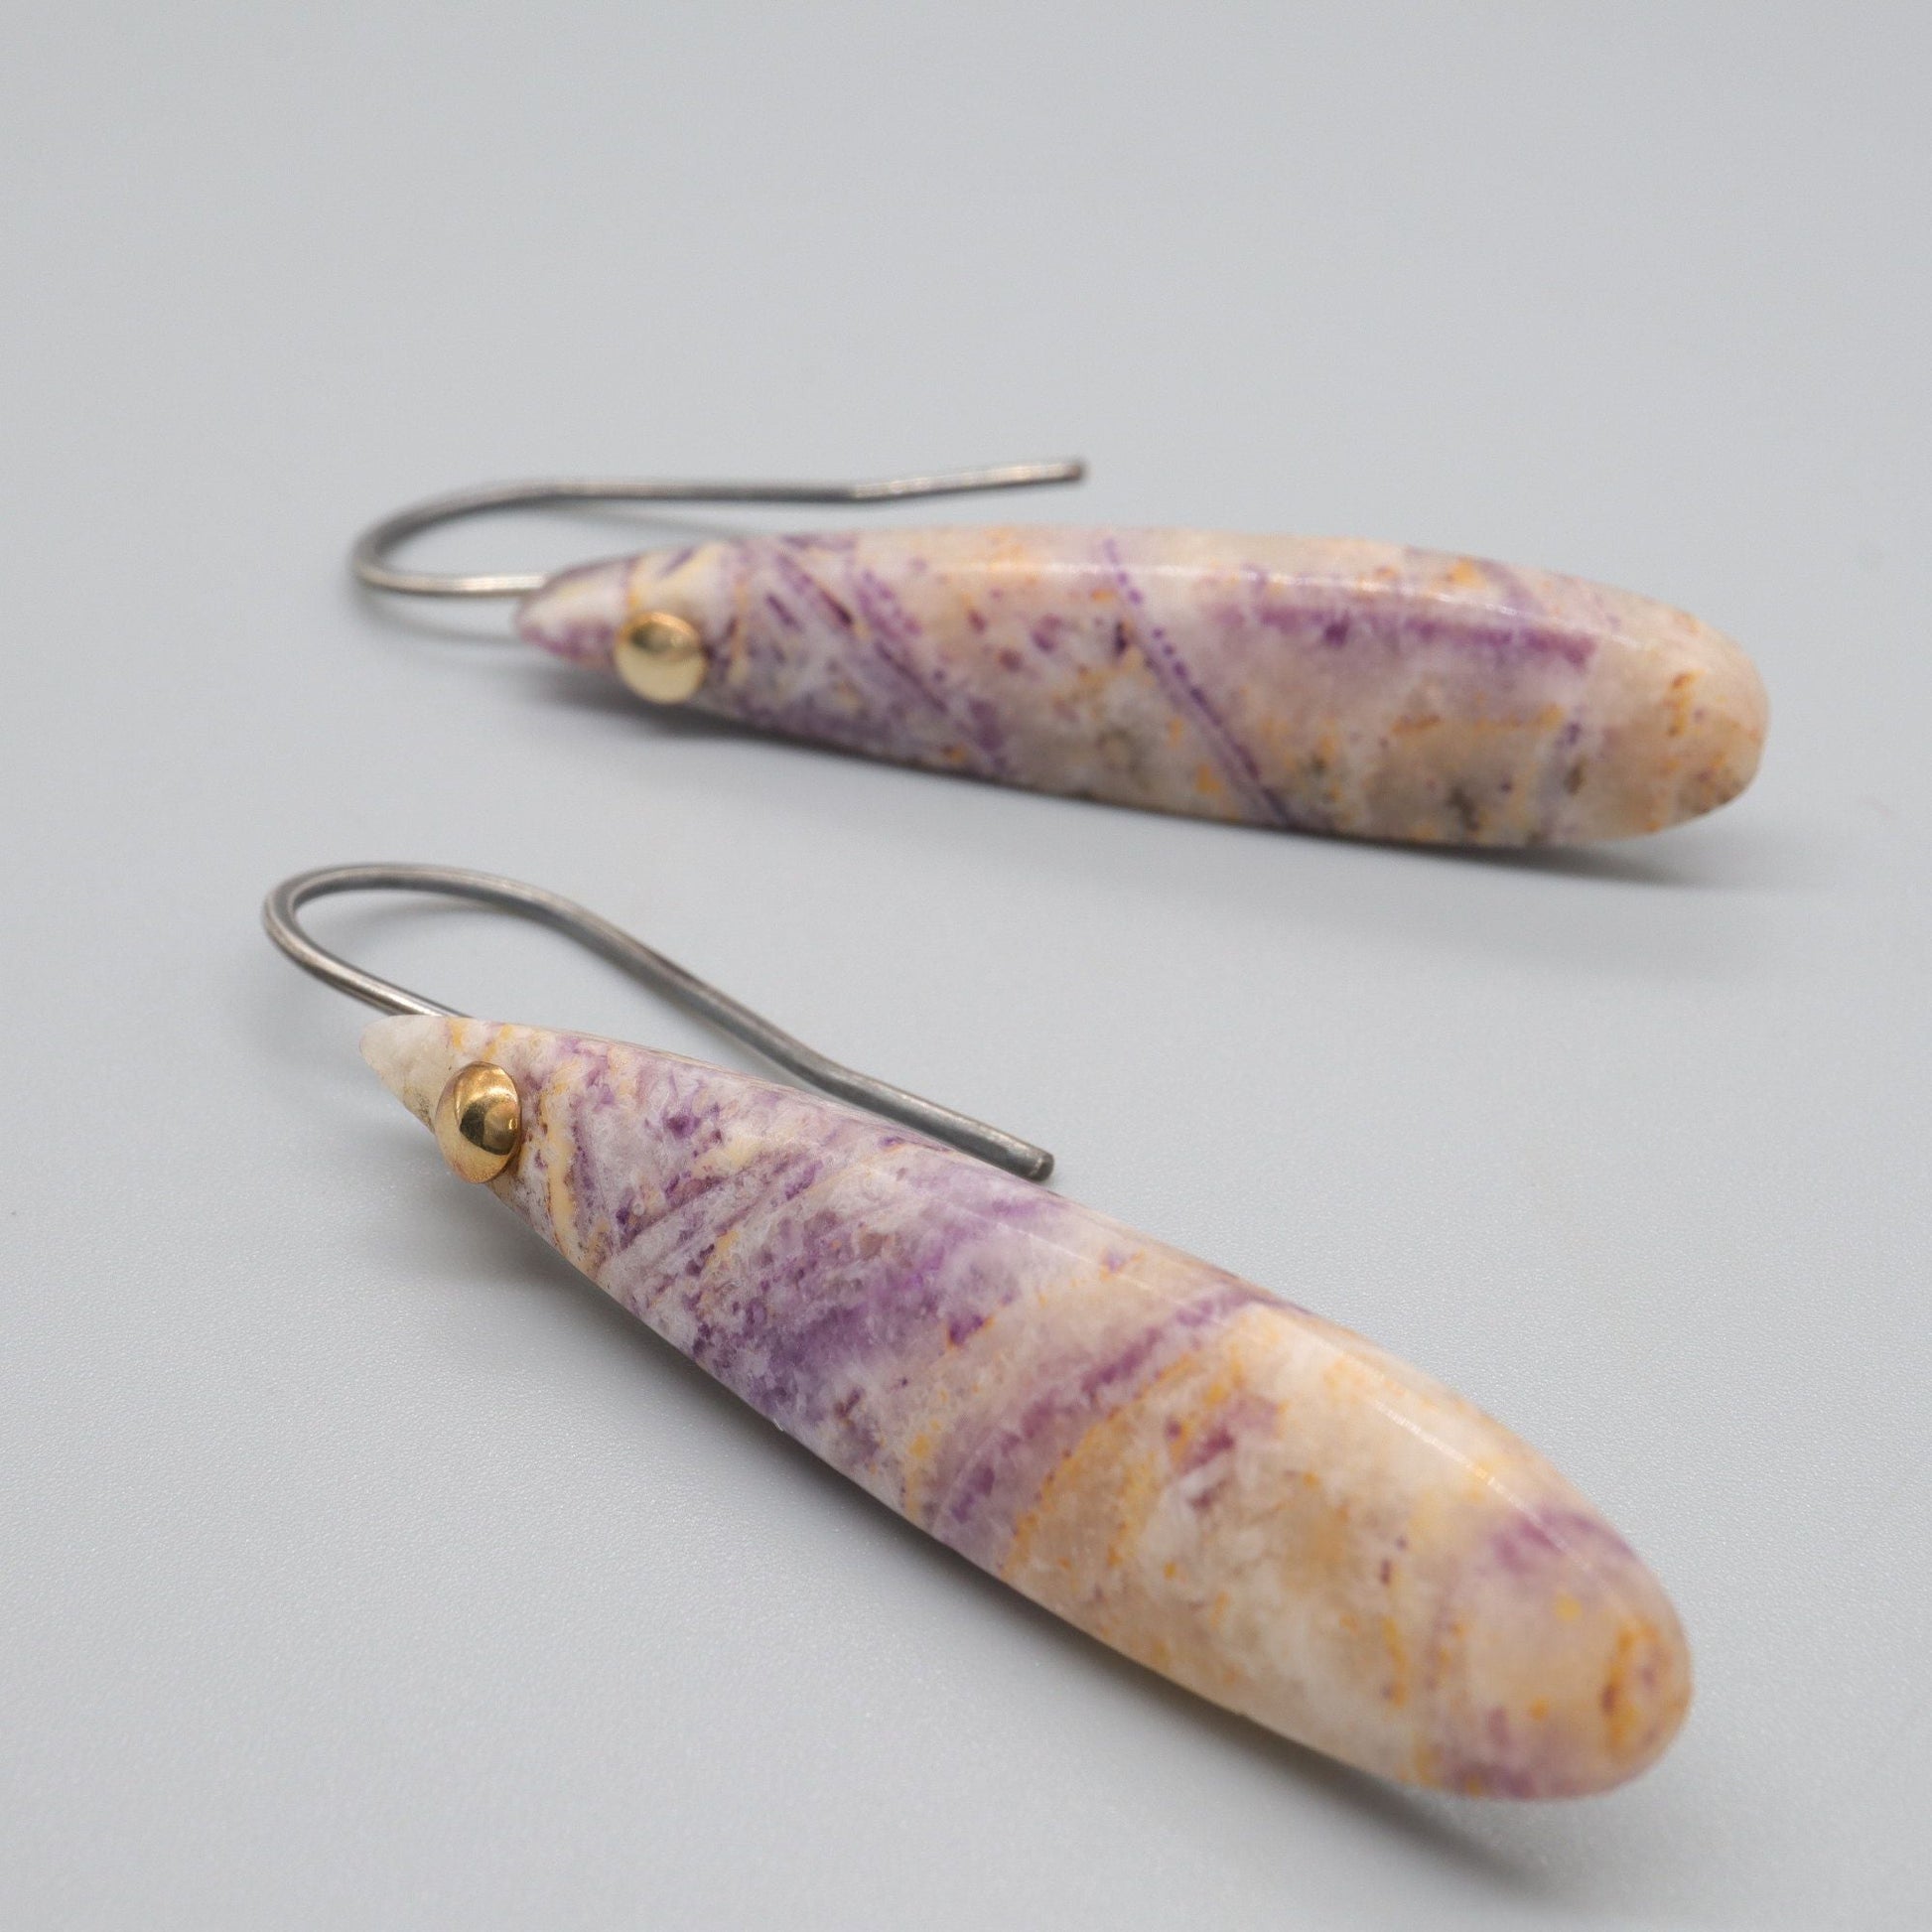 Drop earrings, purple Flourite gemstones with antique dark silver and gold fittings - Gretna Green Wedding Rings